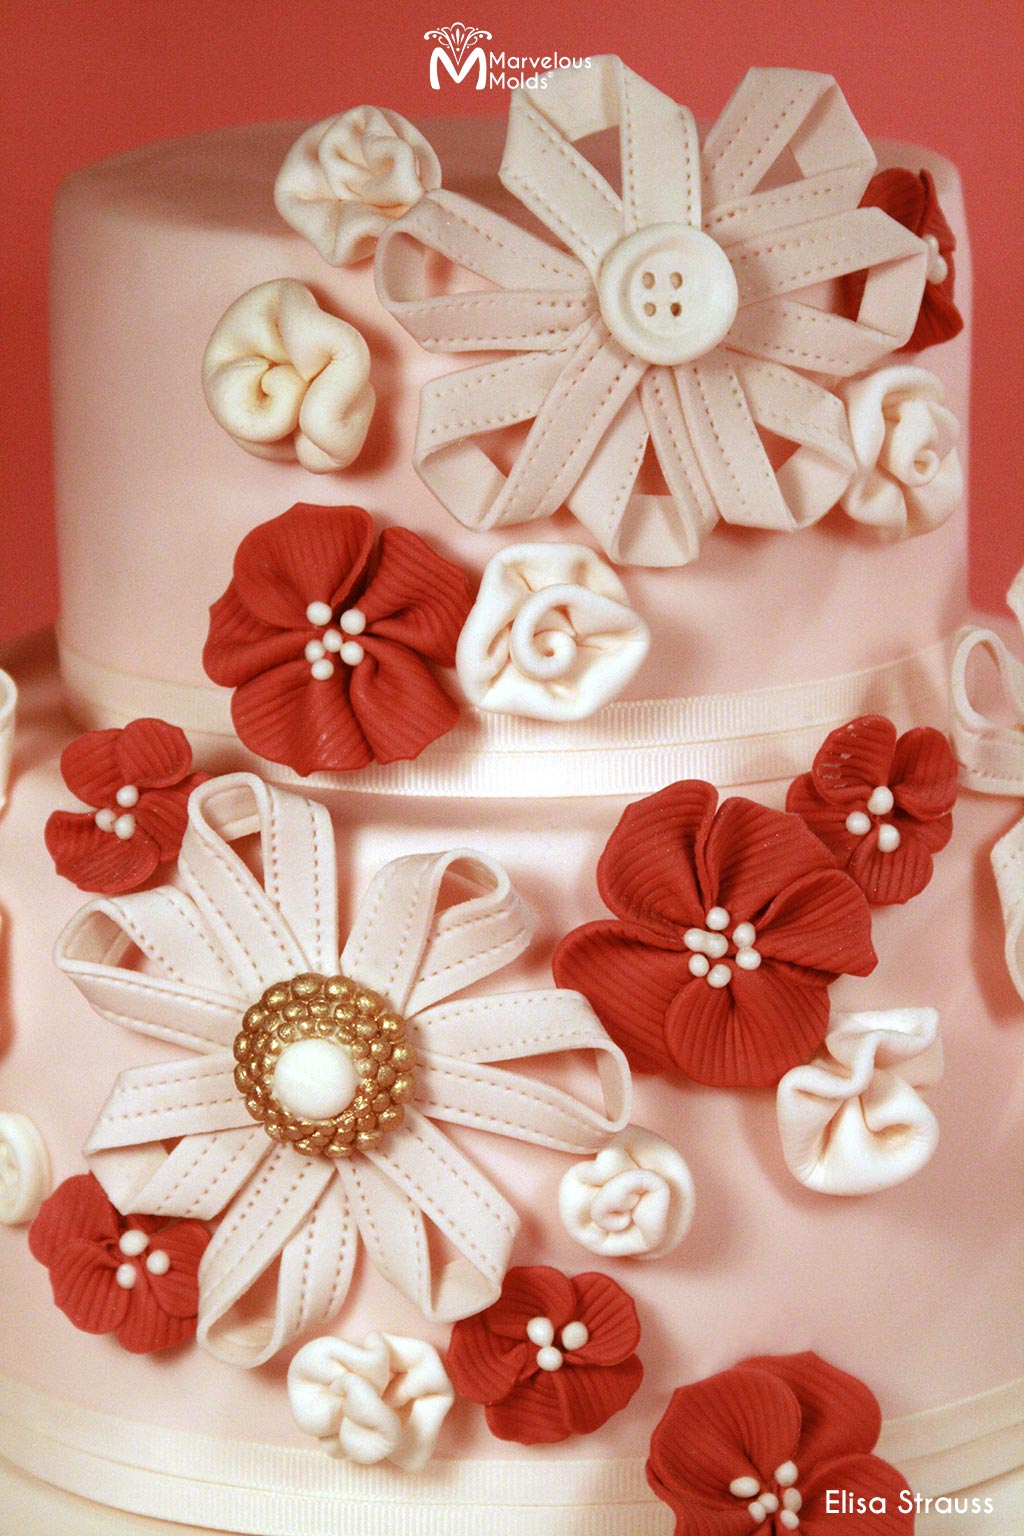 Bows and Buttons Pink Birthday Cake Decorated with Marvelous Molds Beaded Buttons Silicone Mold